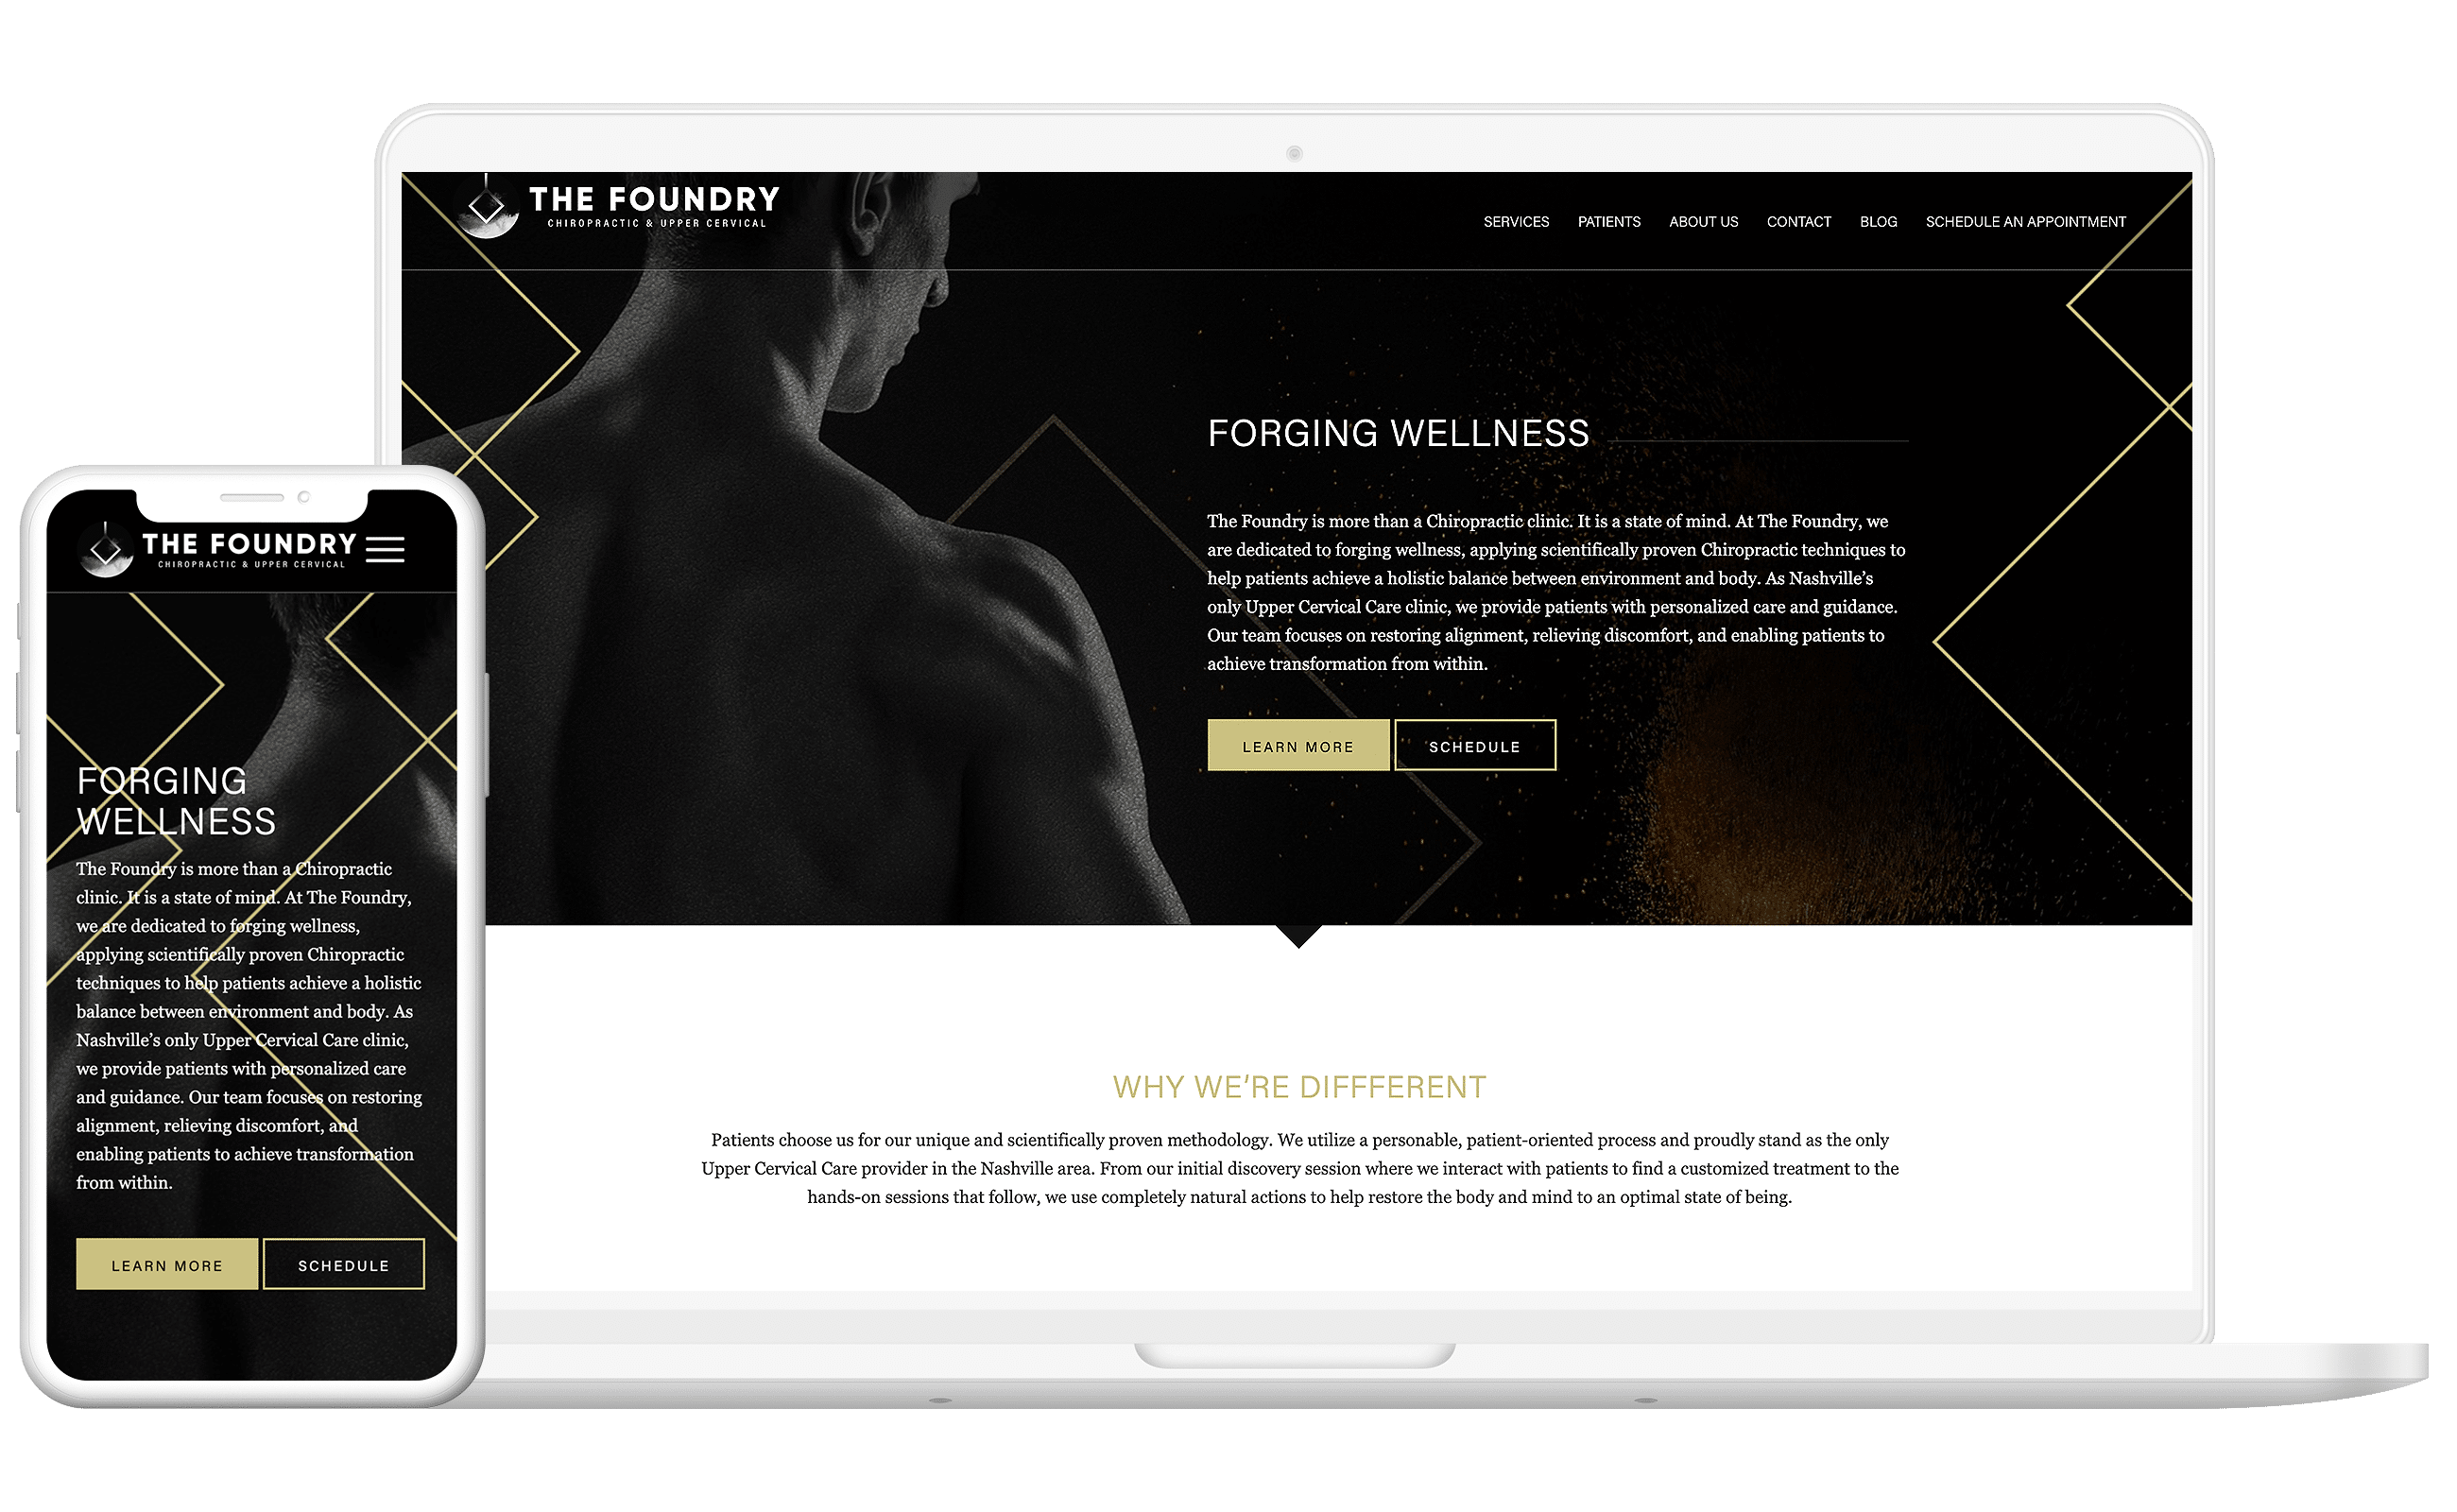 Punch - The Foundry Website in Desktop and Mobile Devices